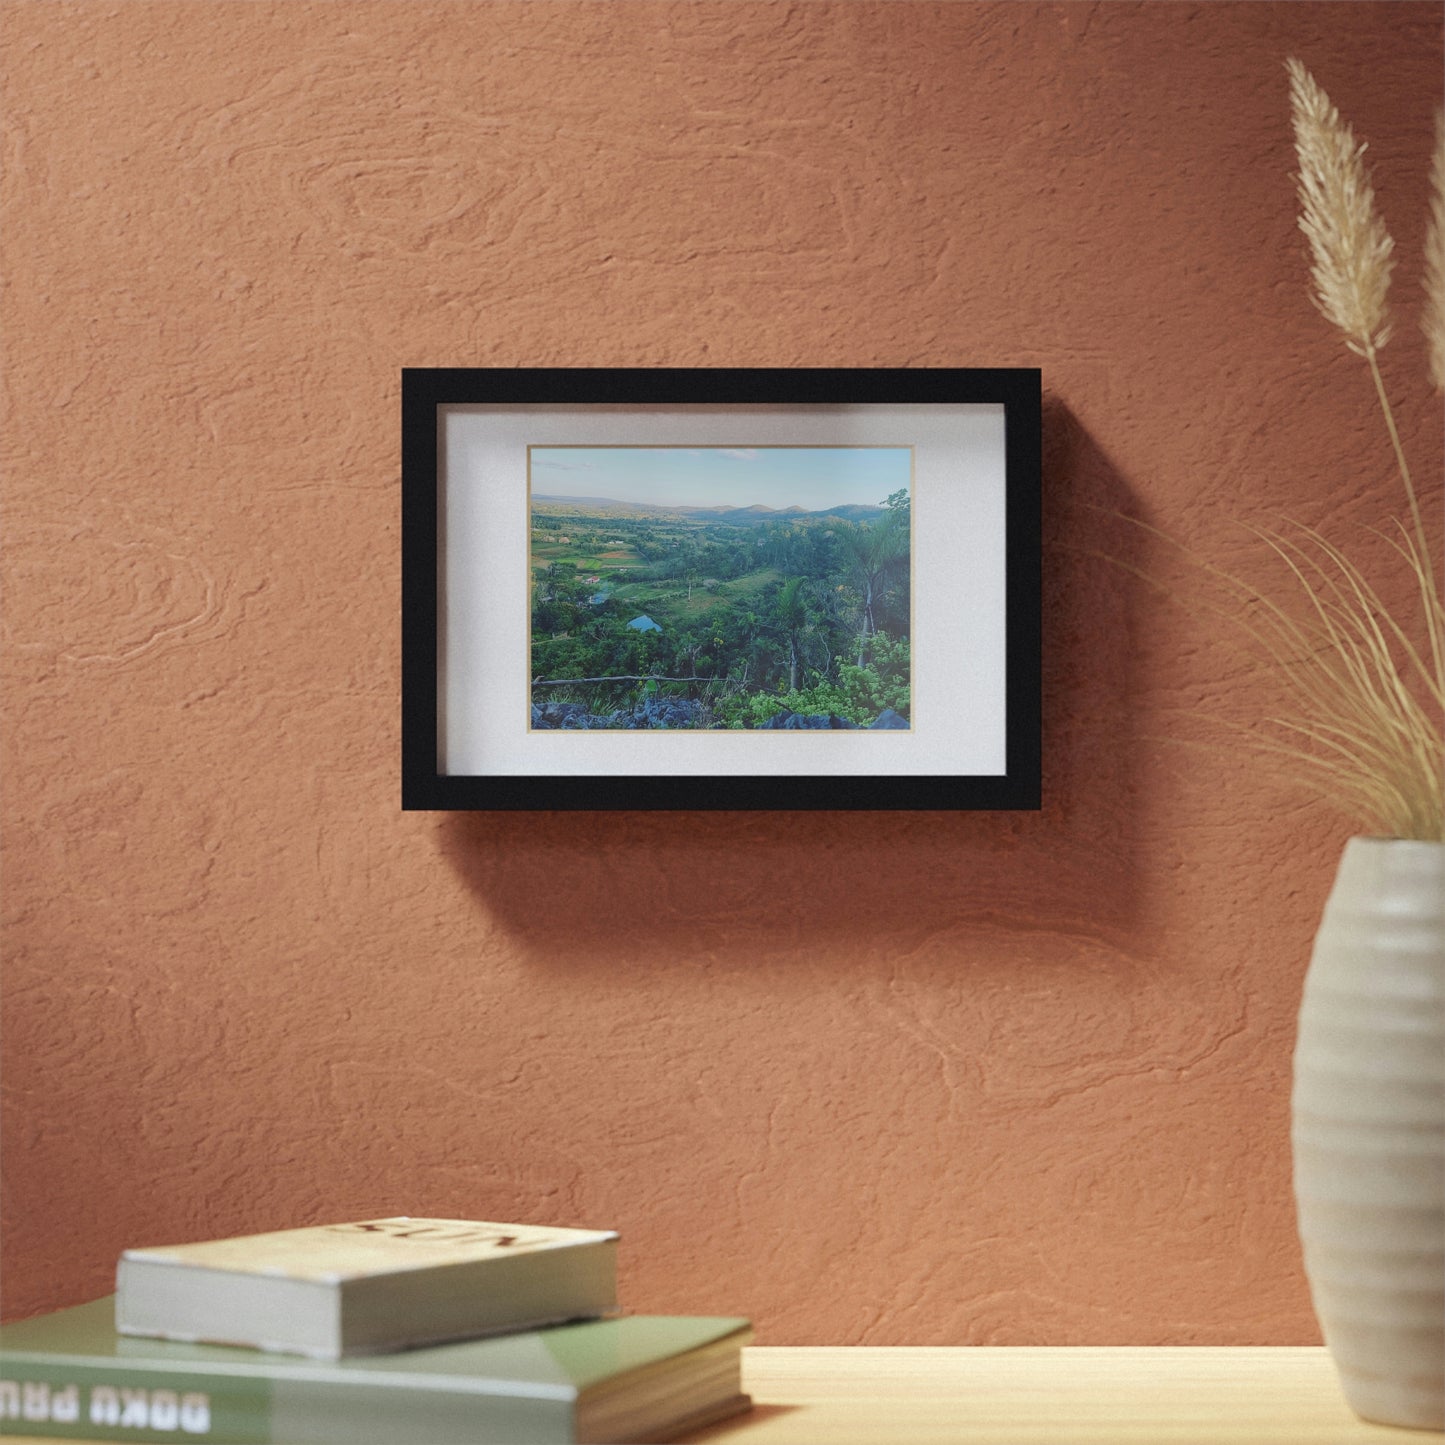 Viñales from above | Cuba | Framed Posters, Black